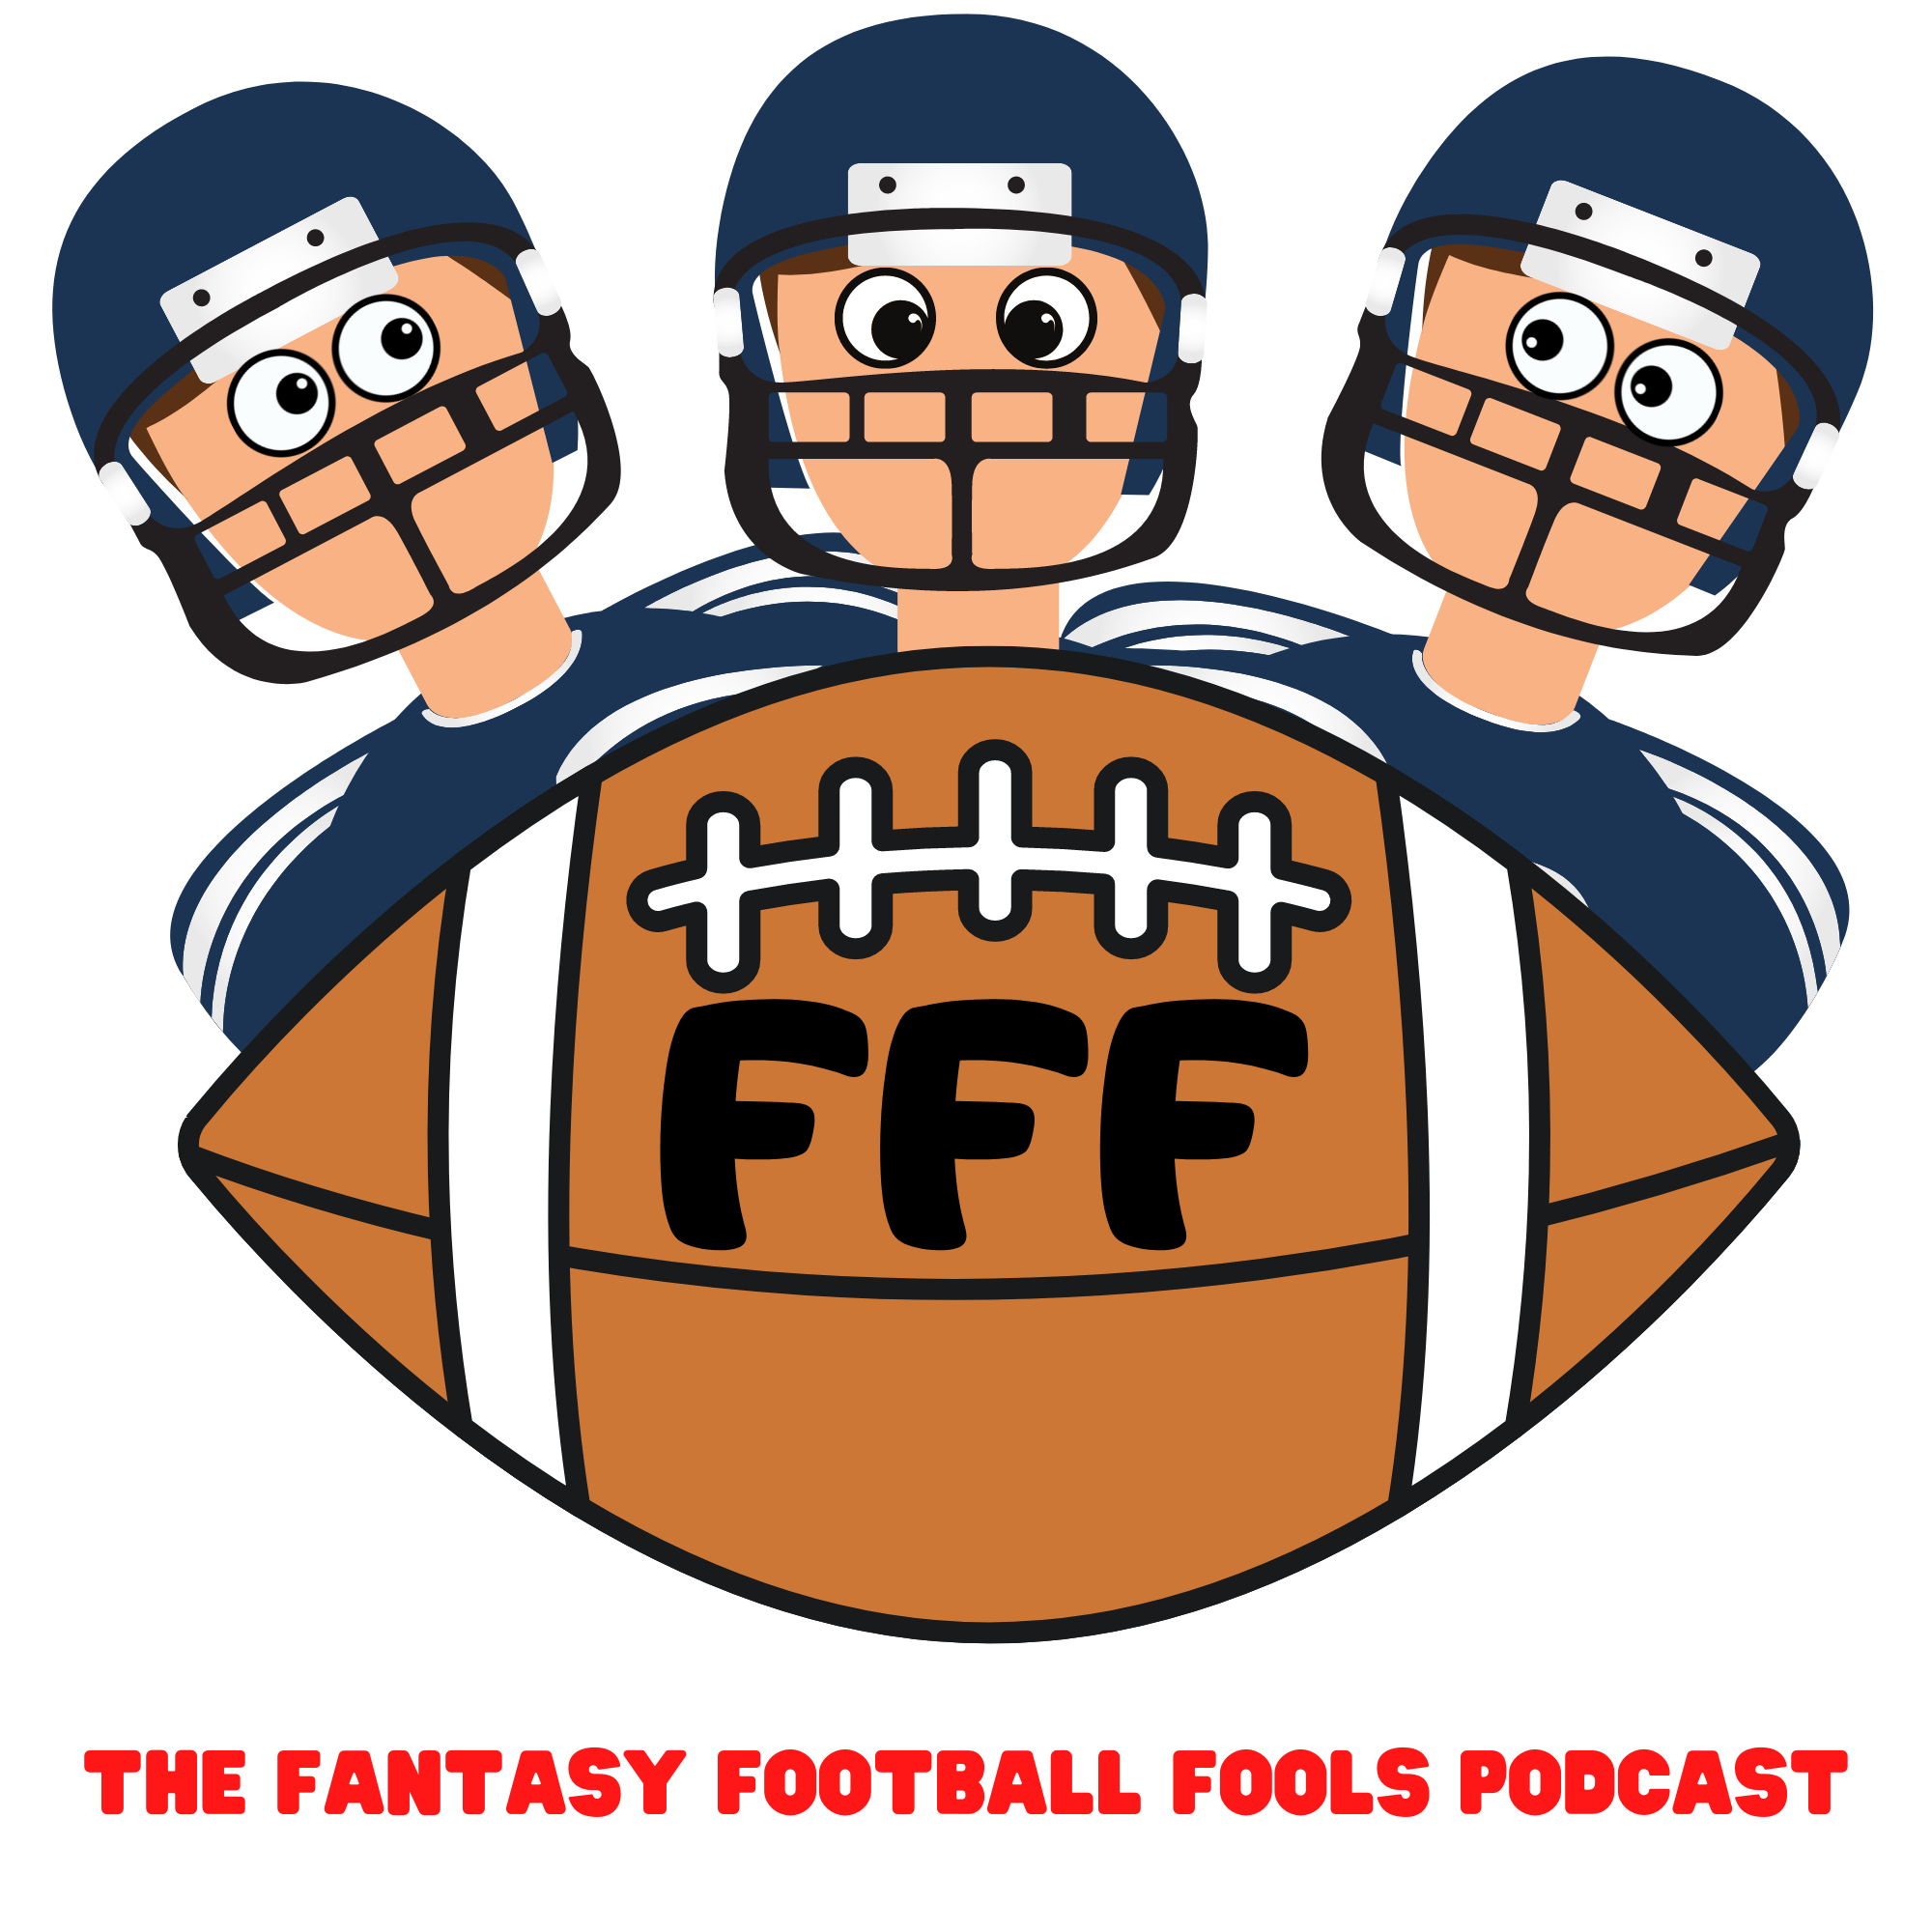 Offseason Trades & Acquisitions, Rookies, and Toughest Division in the NFL - 8/10 Fantasy Football Podcast 